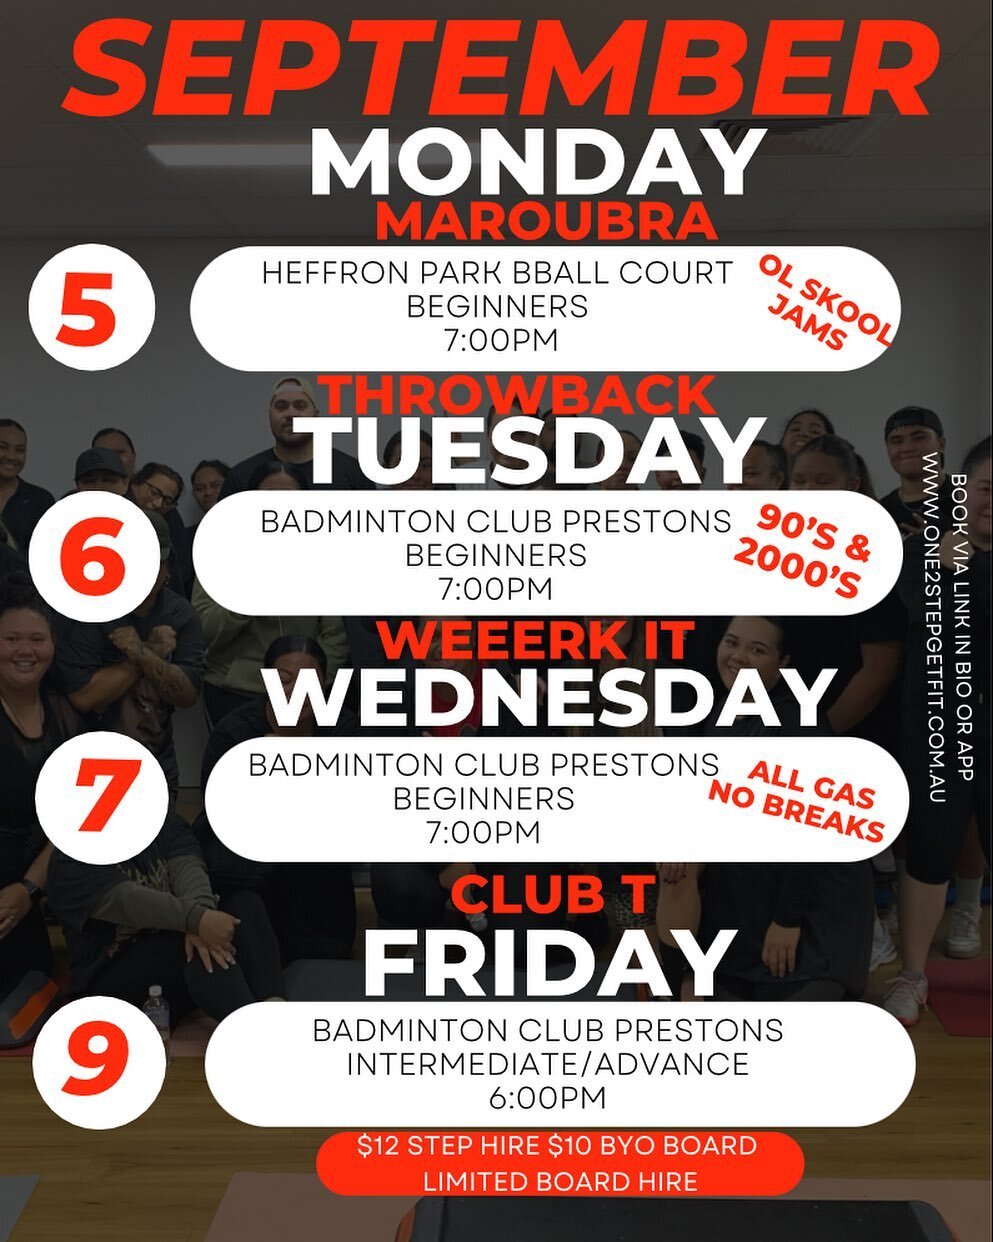 Schedule for the week

🔴Monday Maroubra - Looks like it&rsquo;s going to rain again 😩 but, I&rsquo;m still planning on it just incase it changes. We&rsquo;re still looking to secure a indoor space so classes don&rsquo;t get cancelled. Xtreme Hip Ho